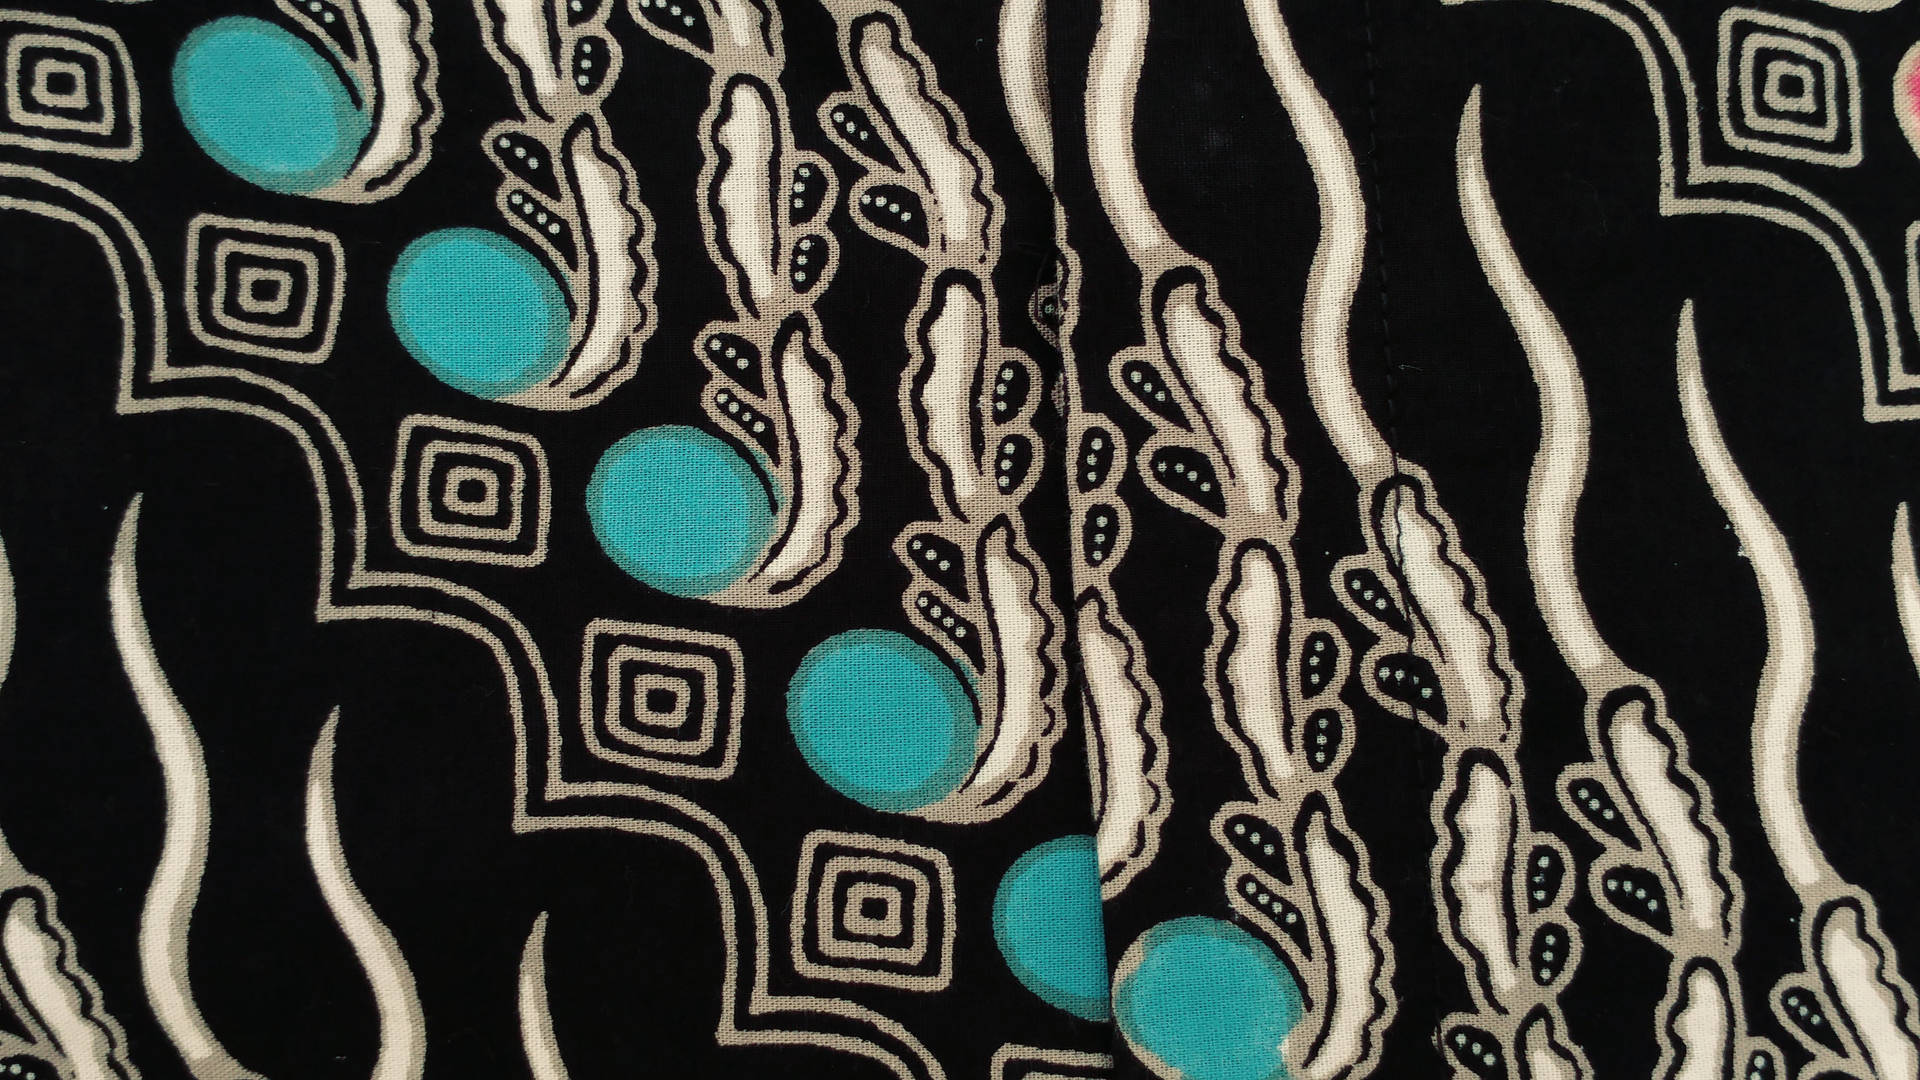 Exquisite Batik Creation with Turquoise Beads Wallpaper